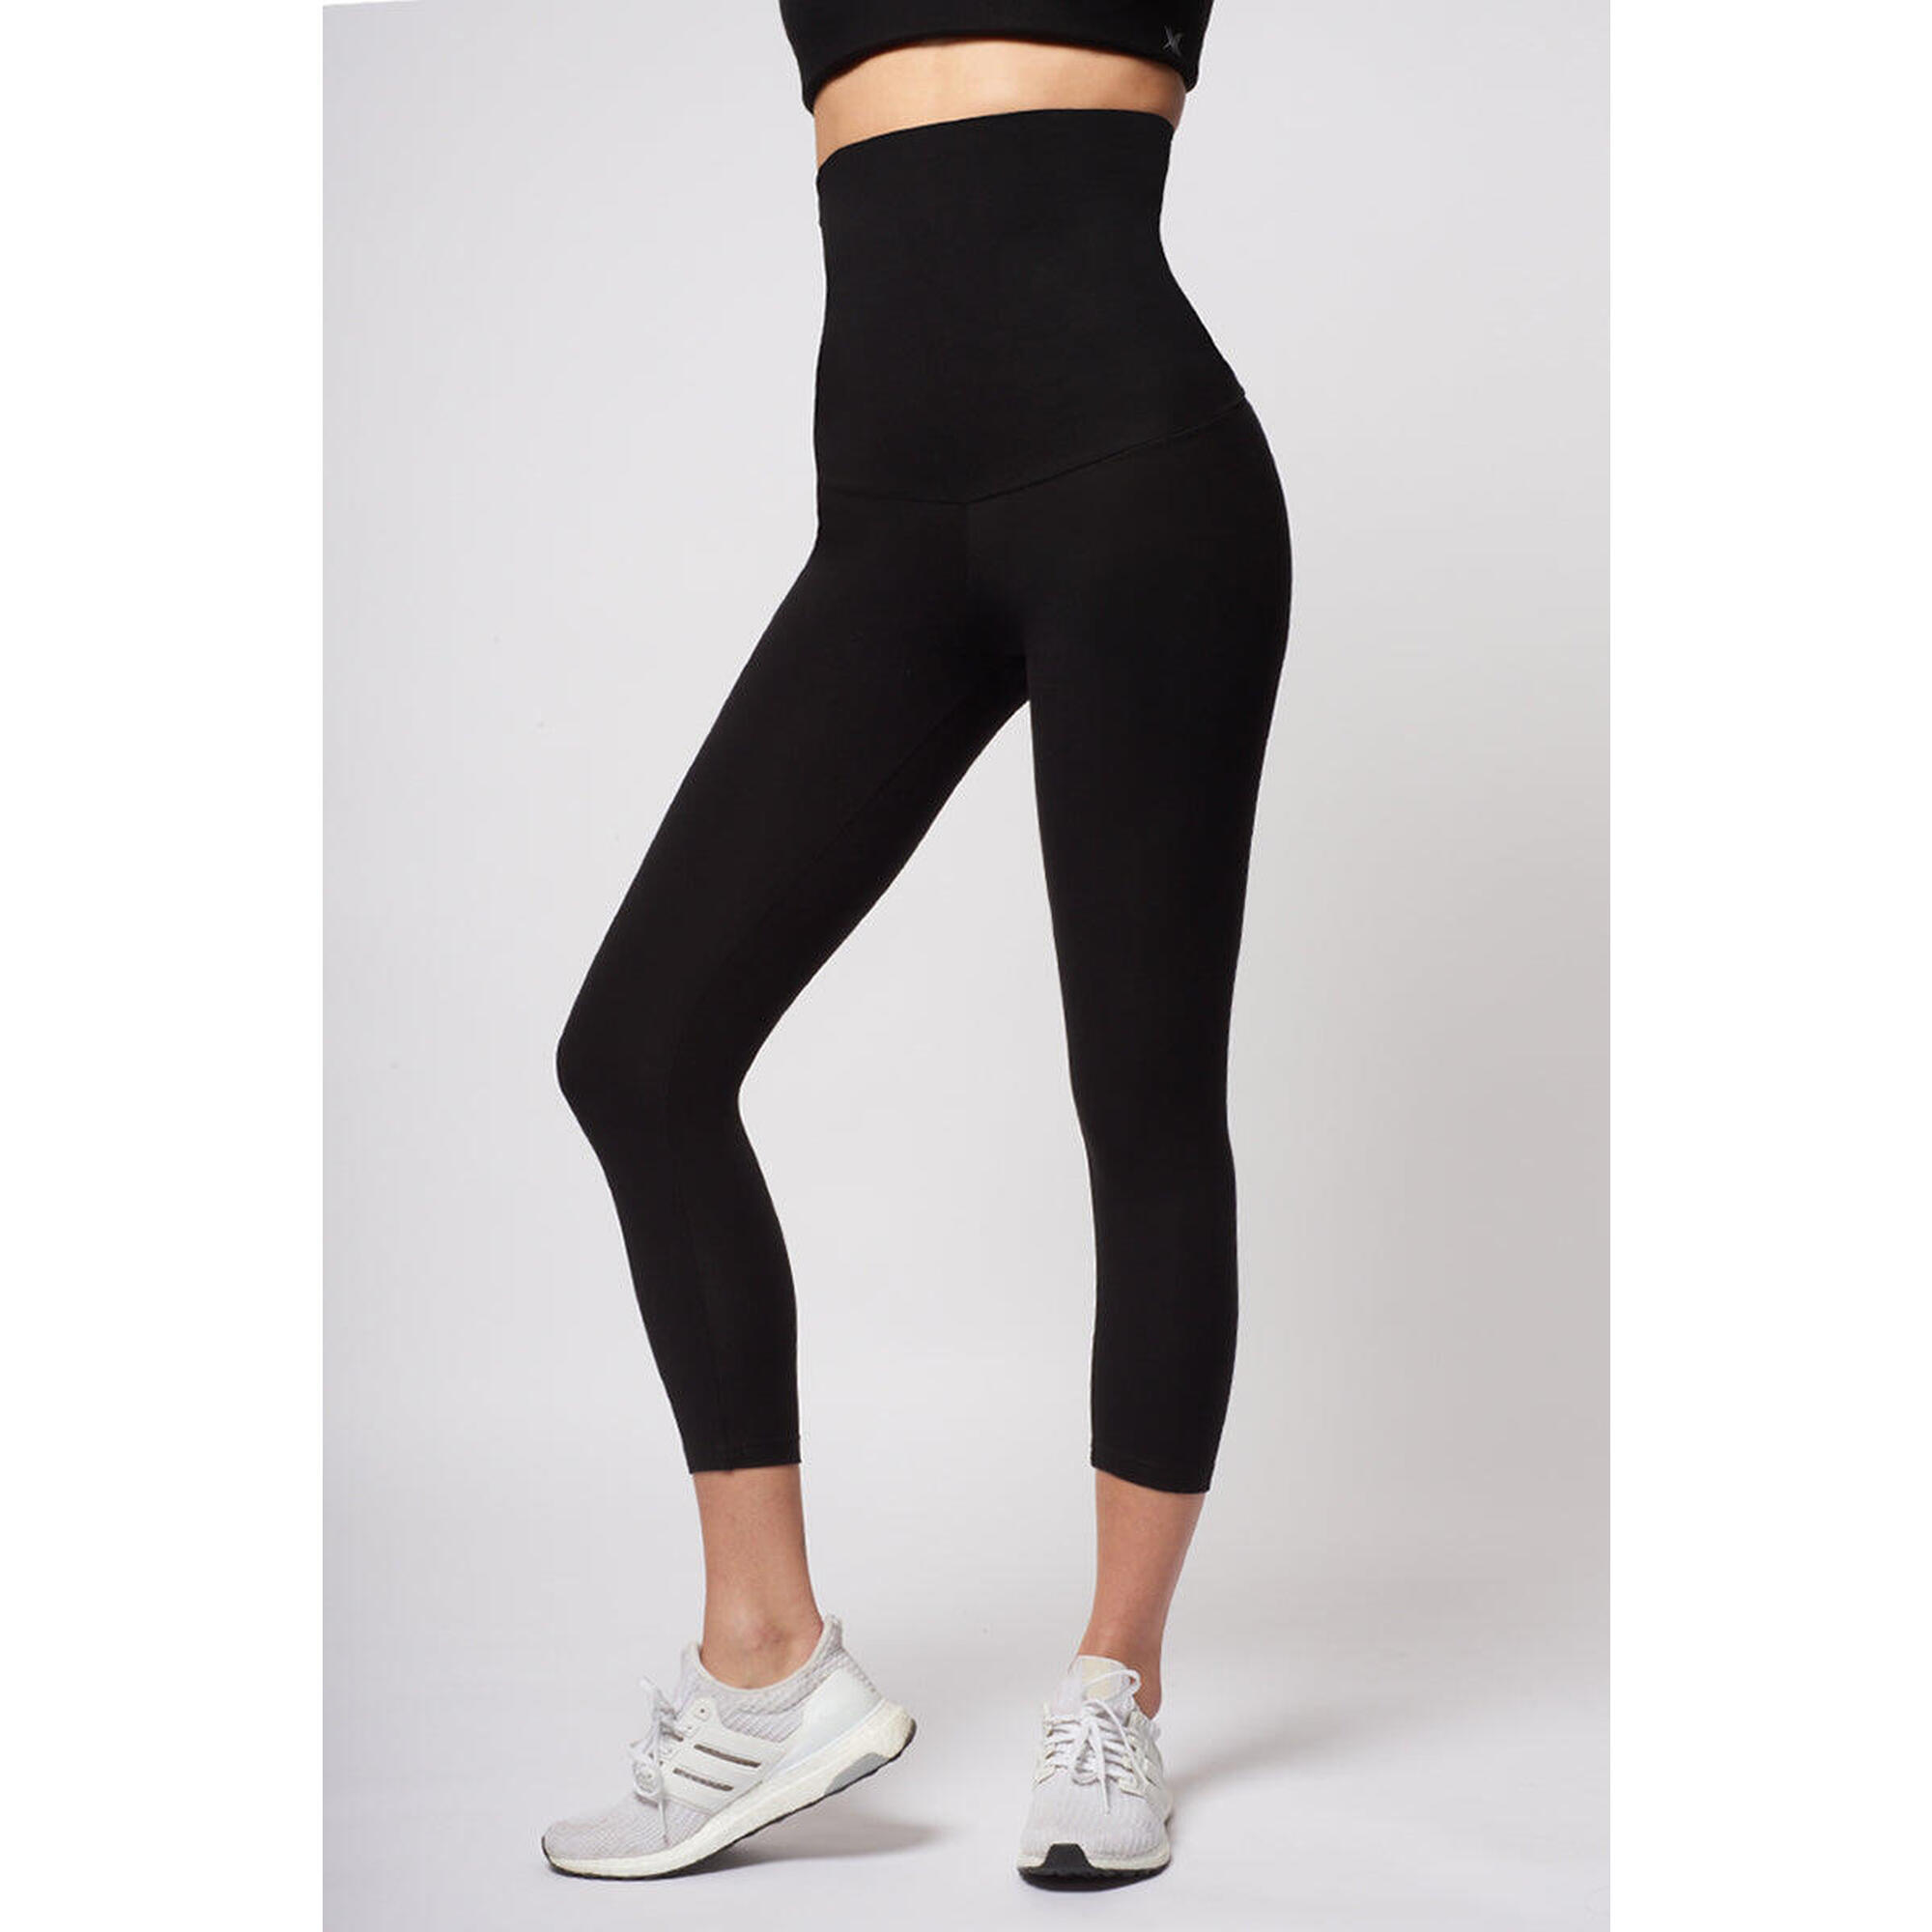 Extra Strong Compression Outer-Thigh Smoothing Leggings with Tummy